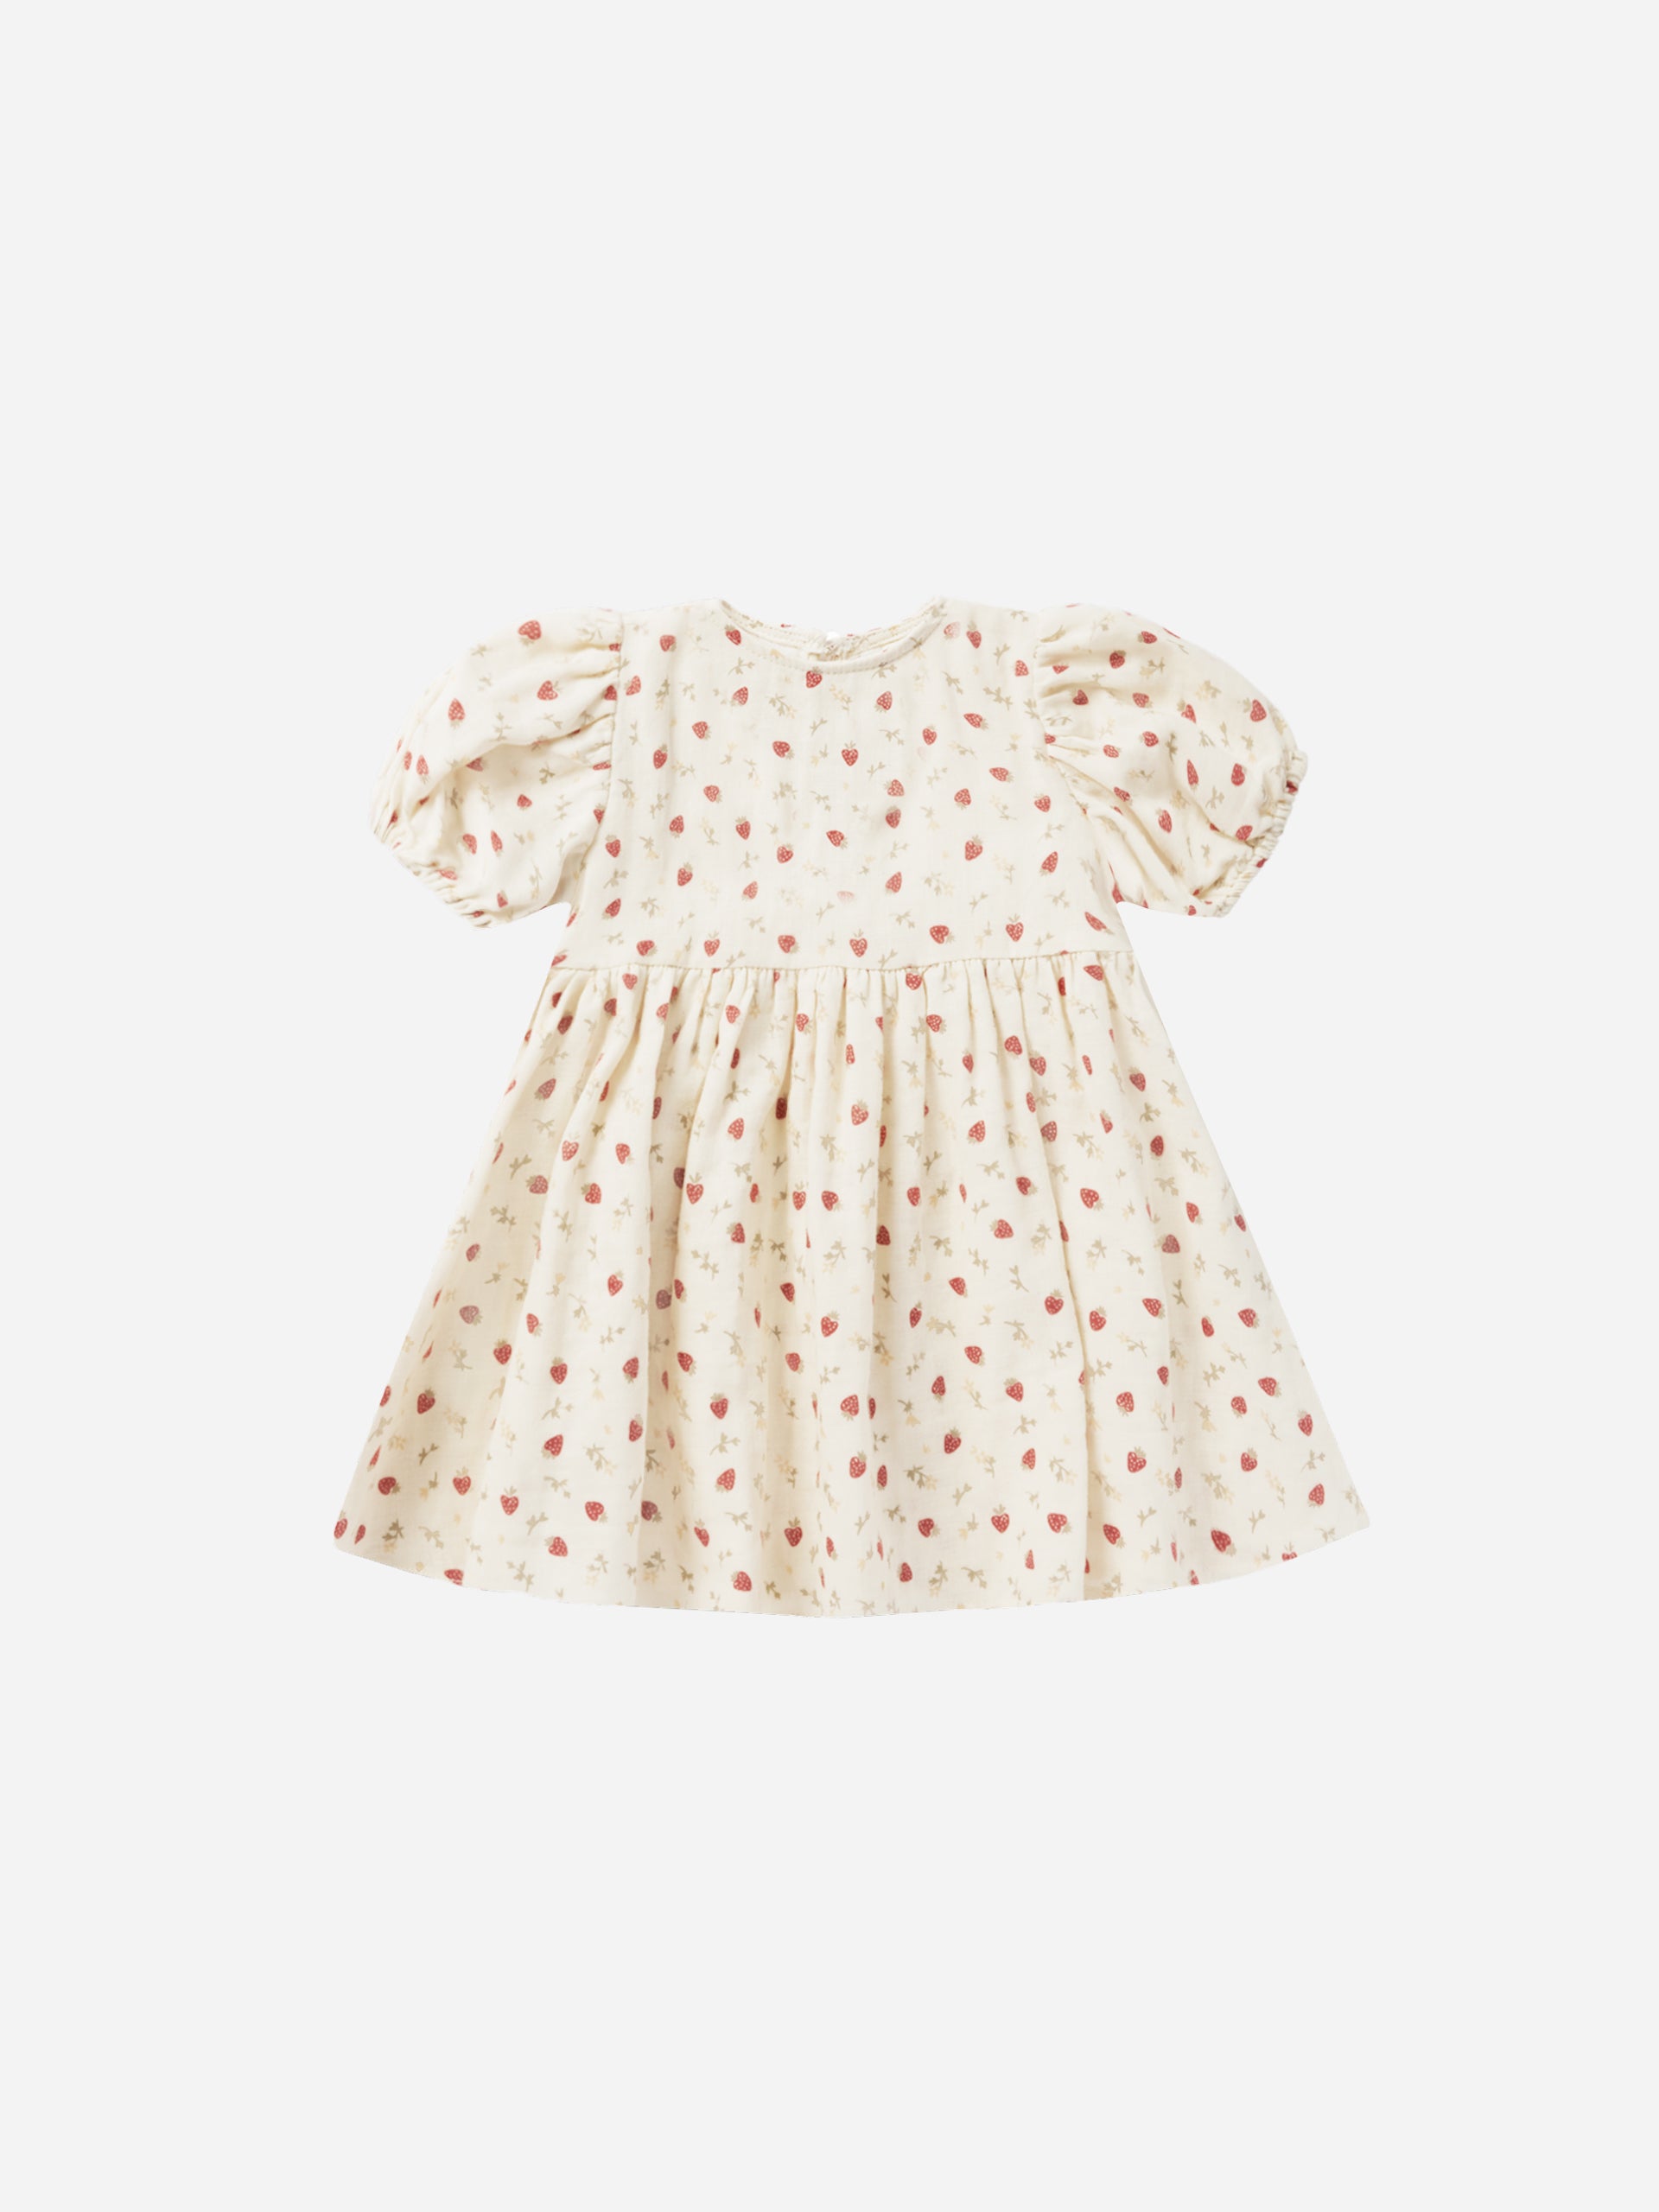 Phoebe Dress || Strawberry Fields - Rylee + Cru | Kids Clothes | Trendy Baby Clothes | Modern Infant Outfits |